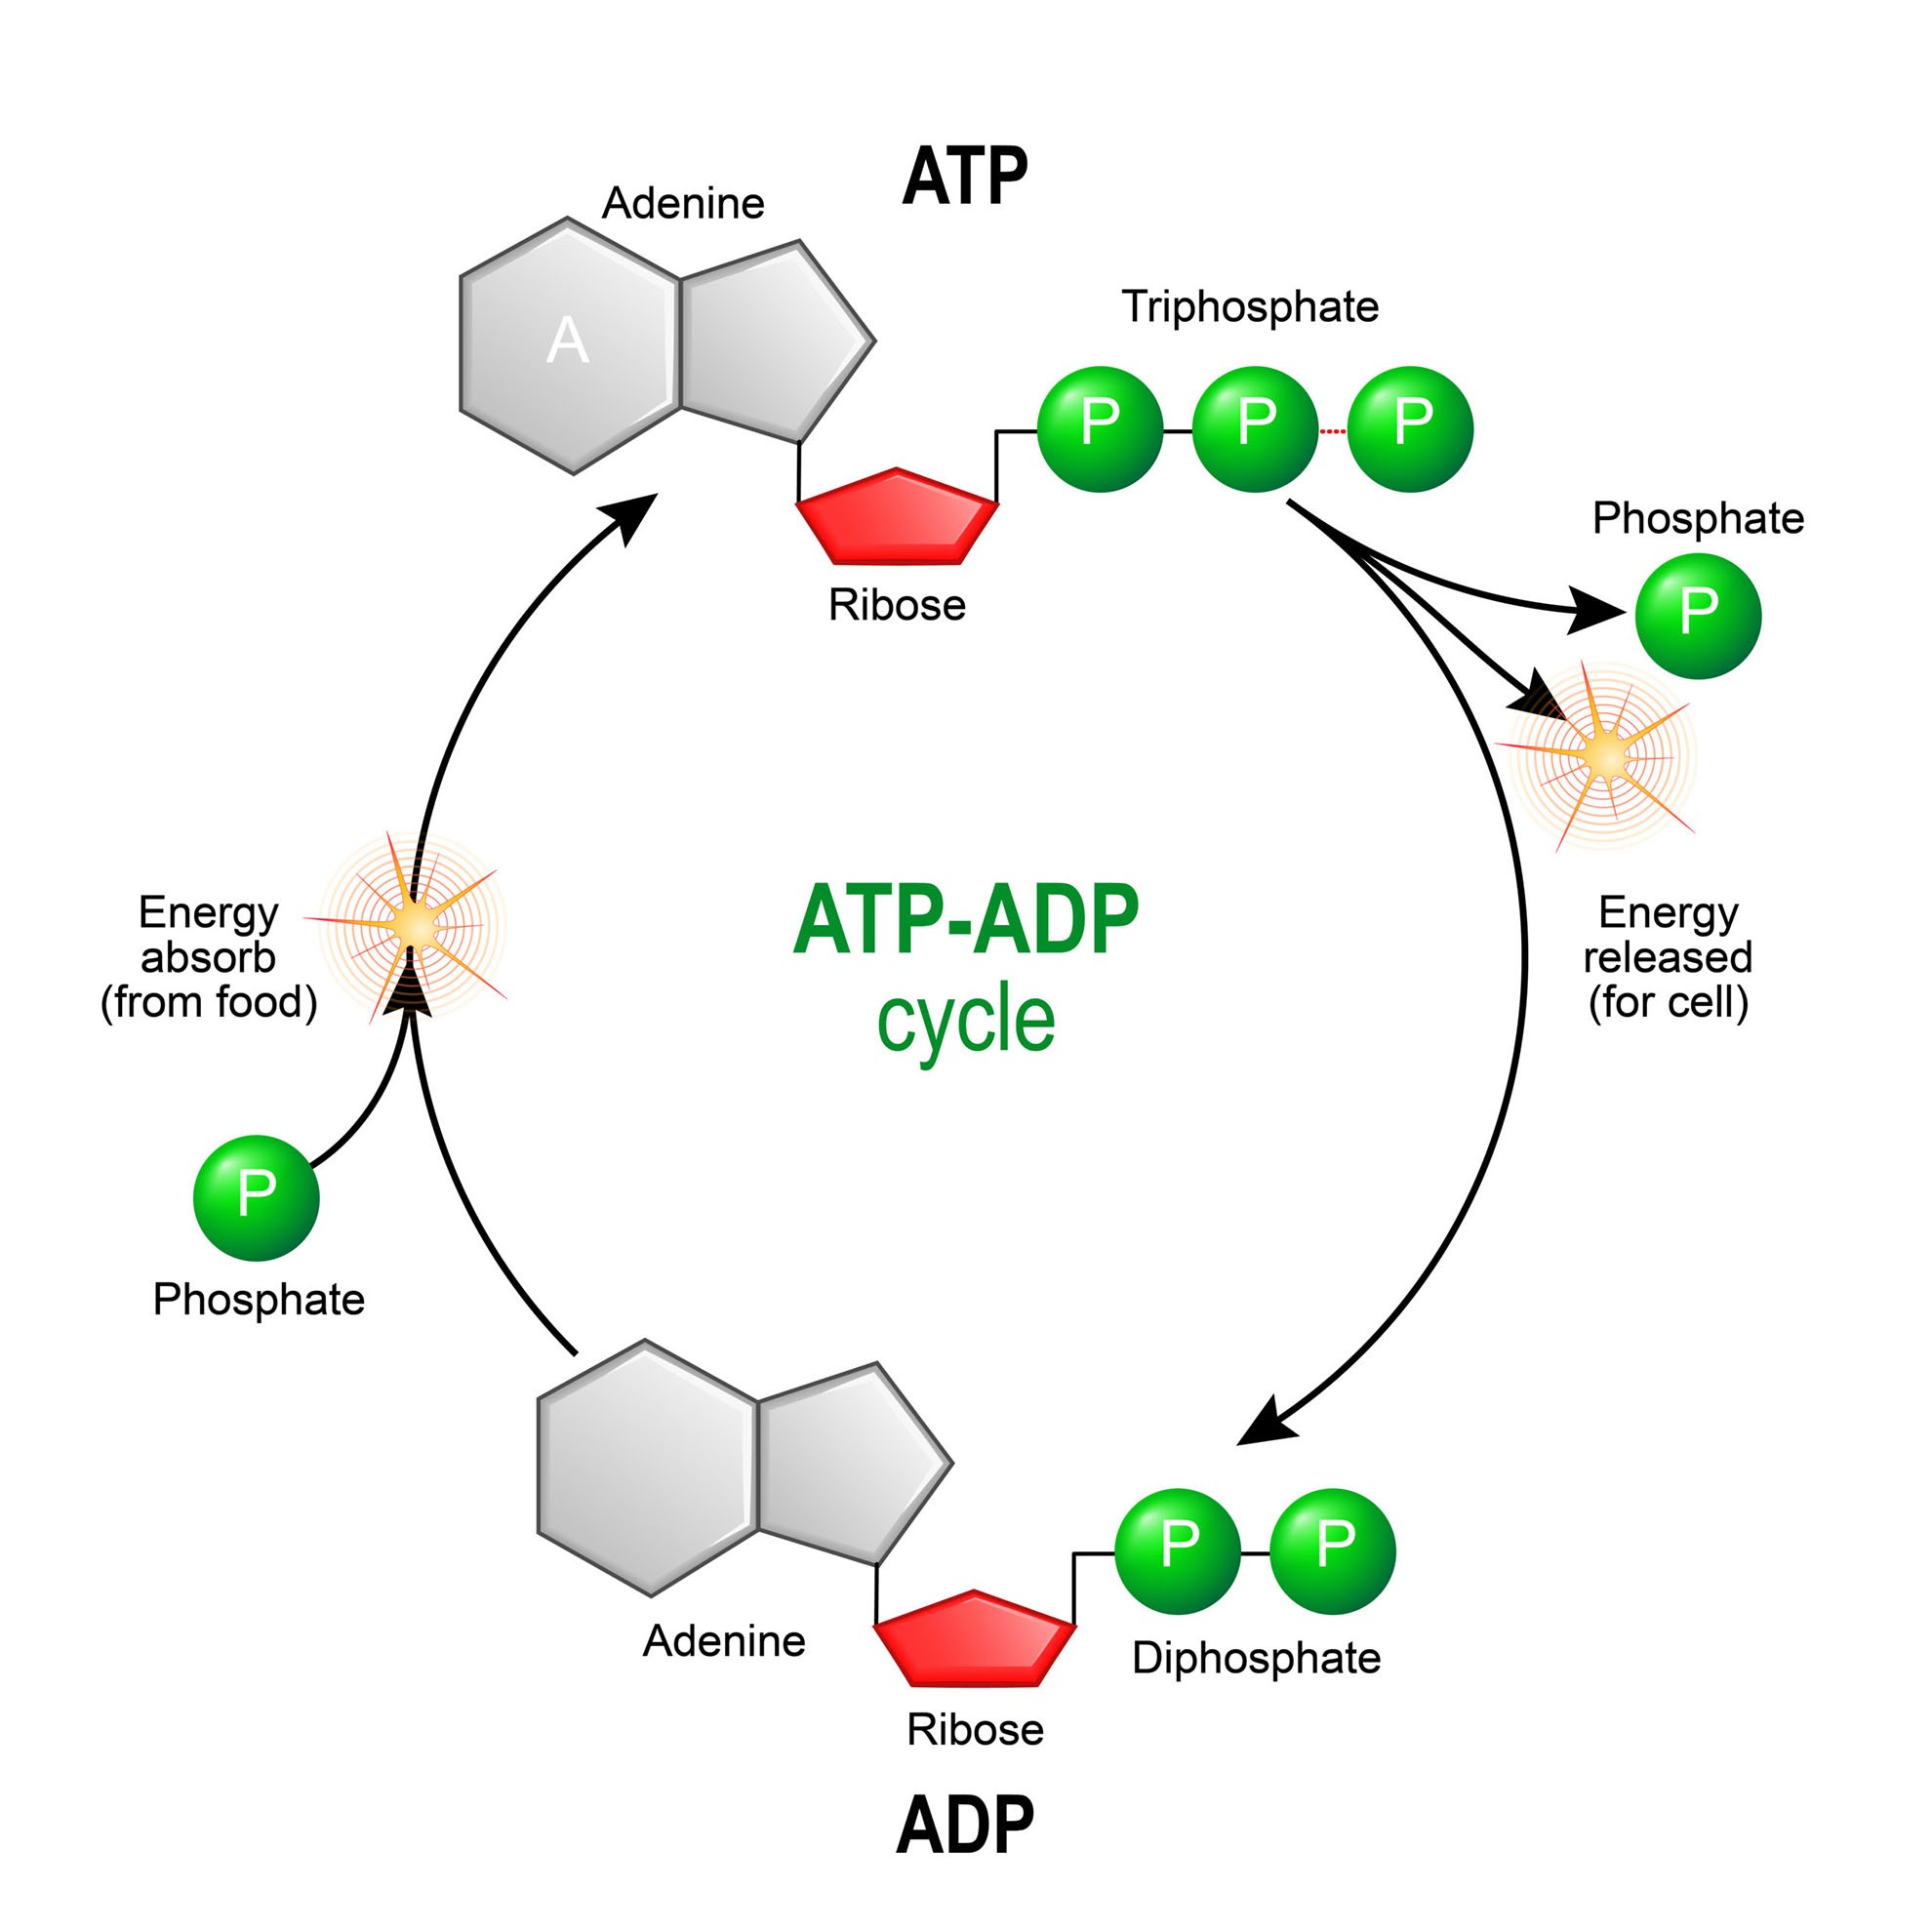 atp-structure-labeled